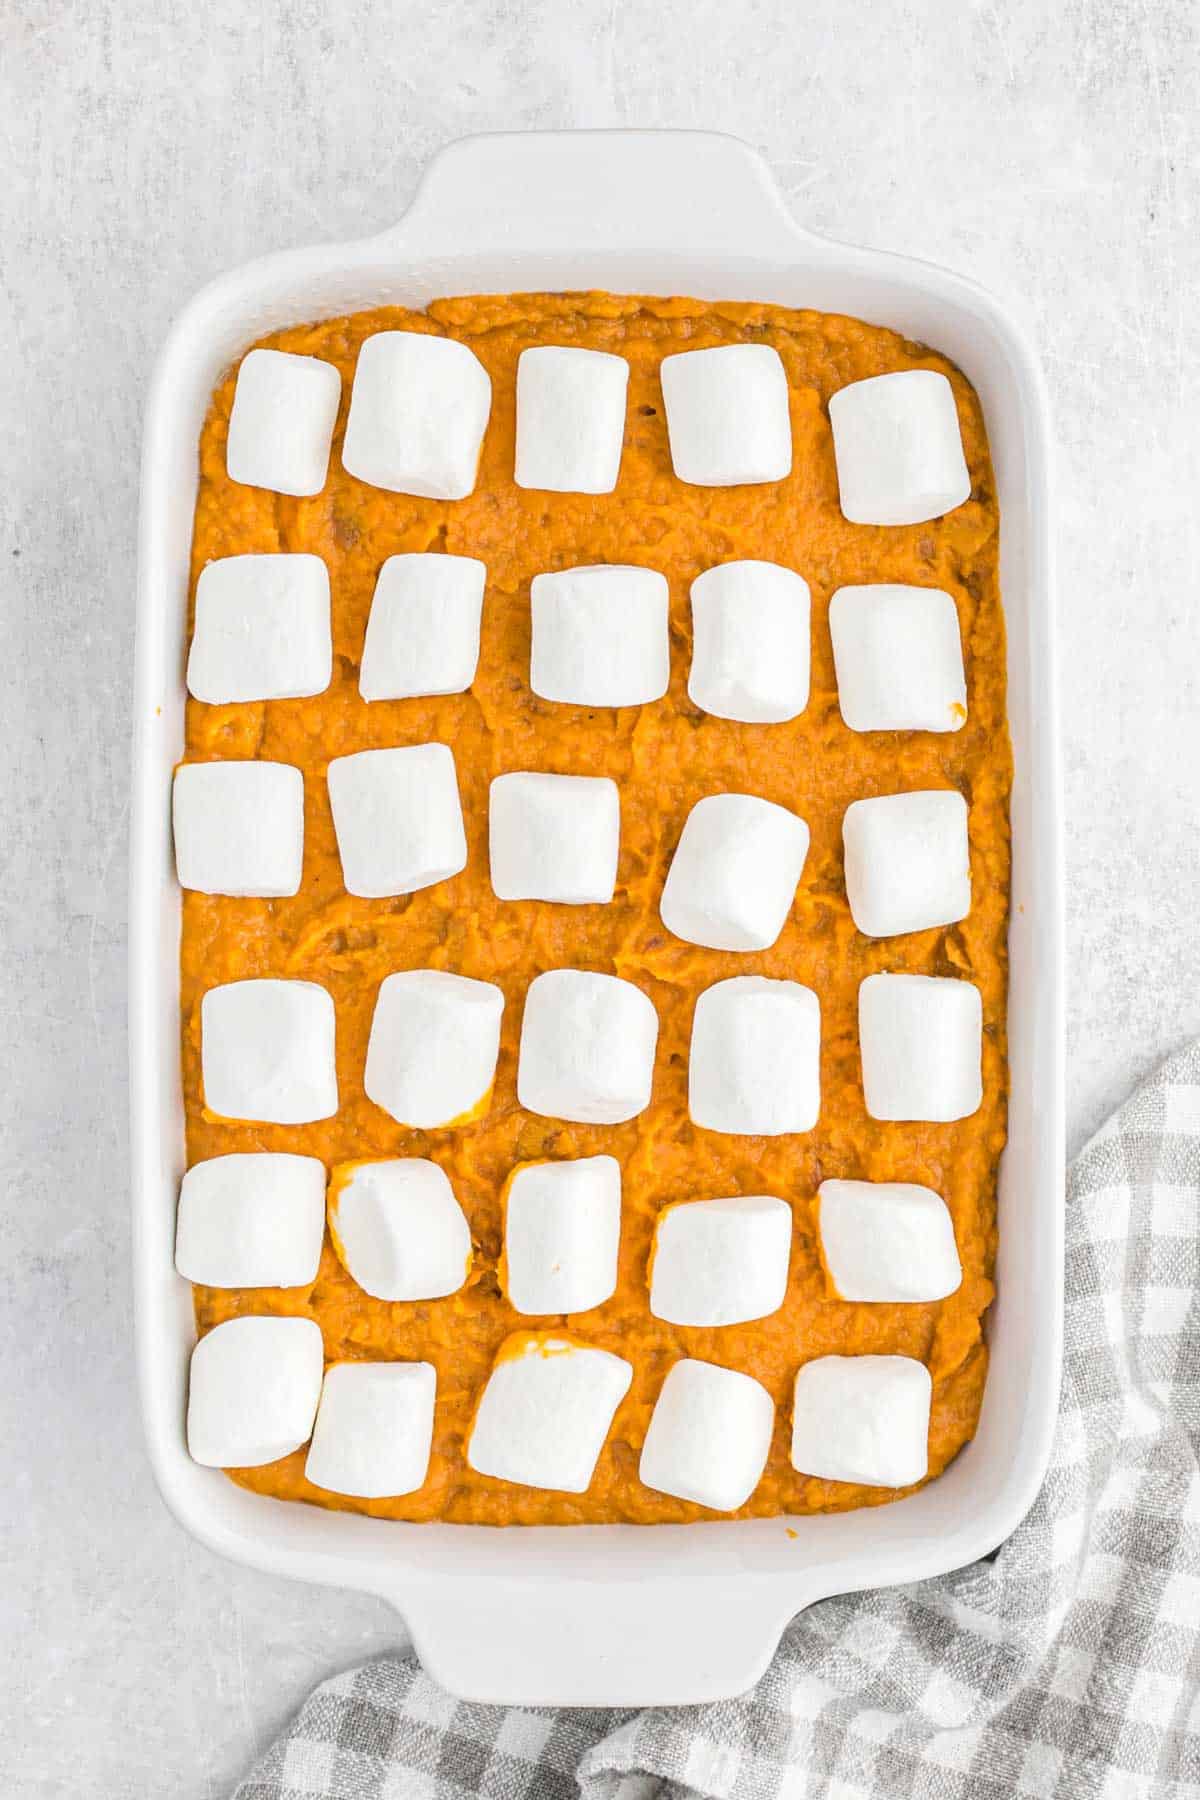 Sweet potato casserole in the dish with marshmallows on top.